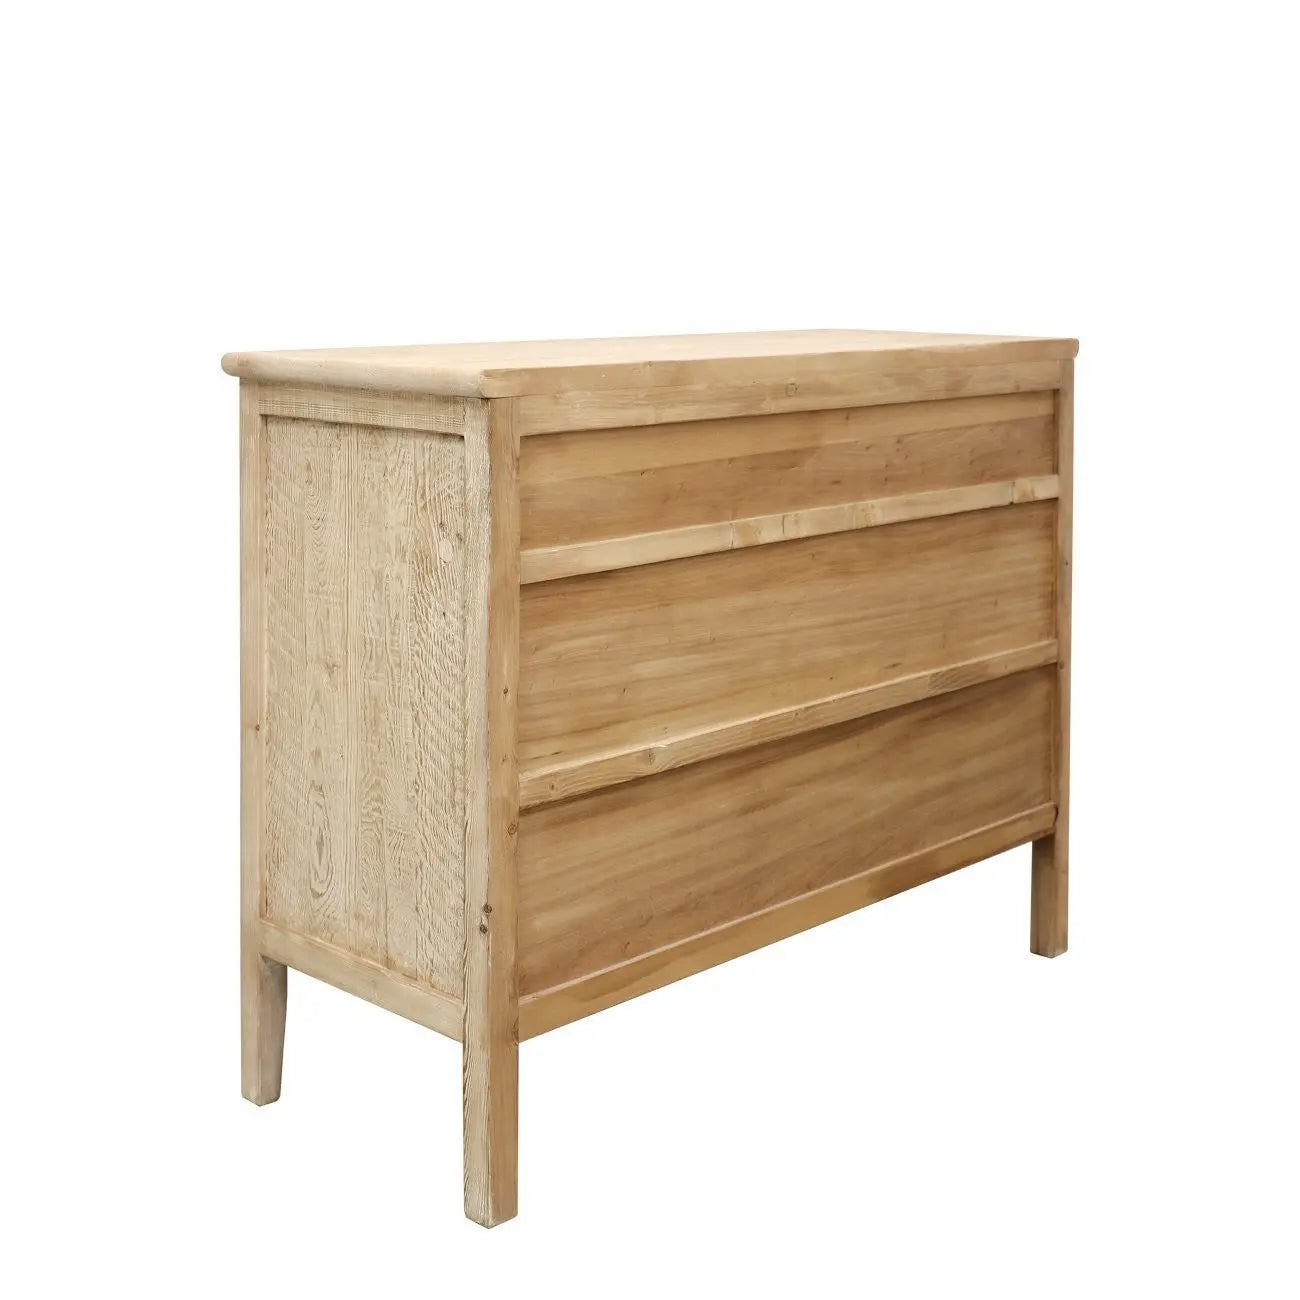 Marcos Chest of Drawers Hawthorne Group